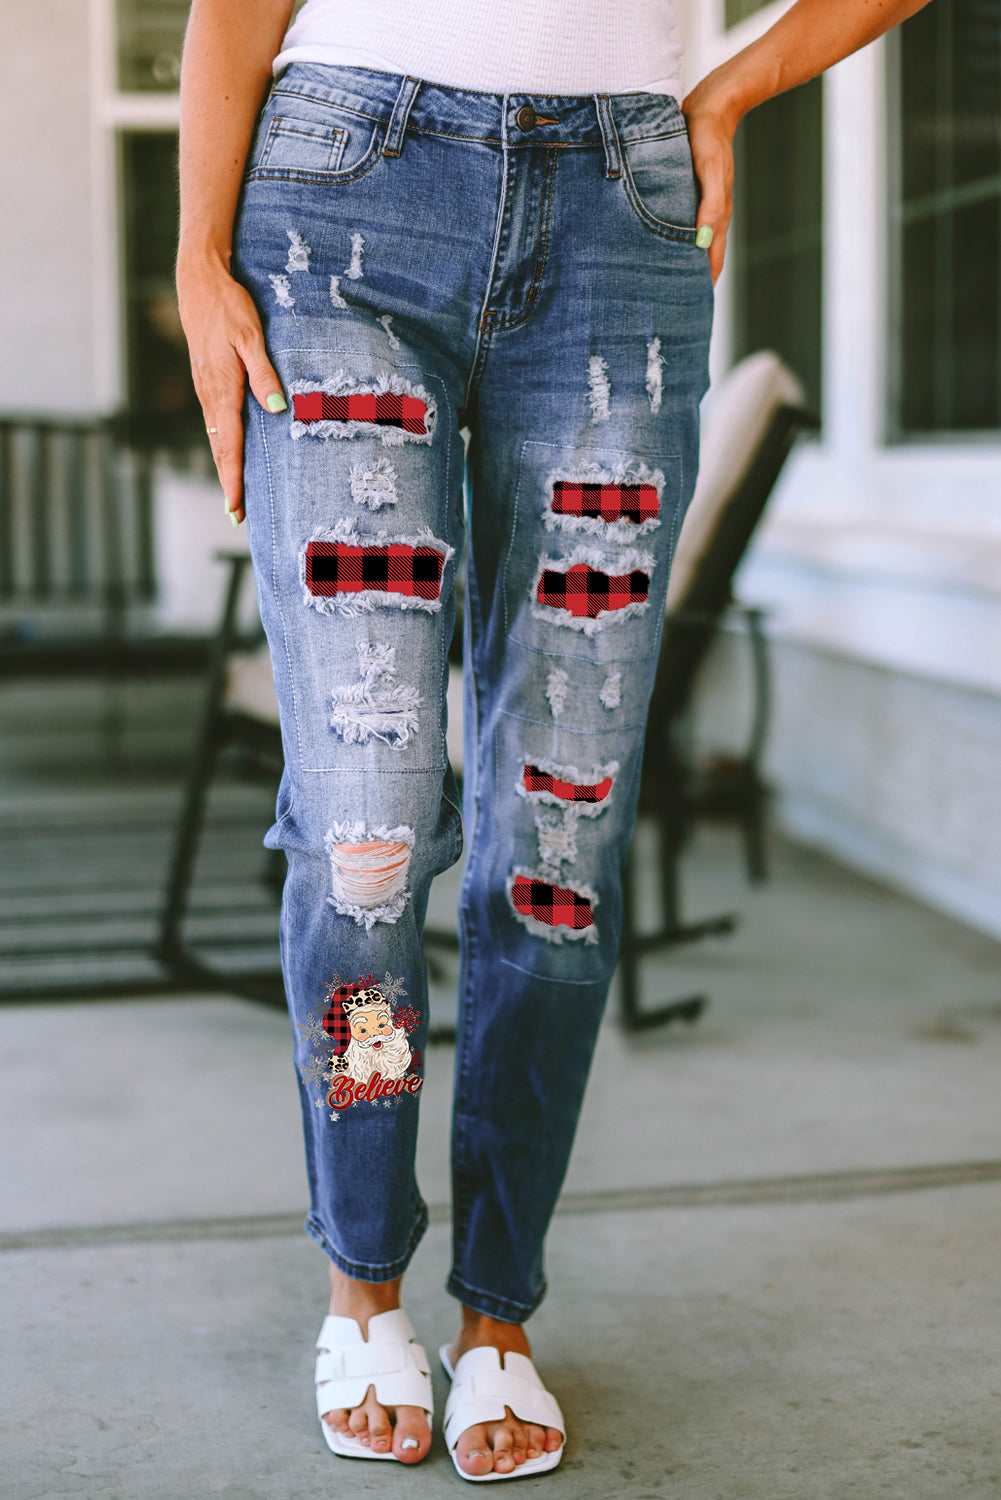 Summer Anastacia Plaid Distressed Jeans with Pockets